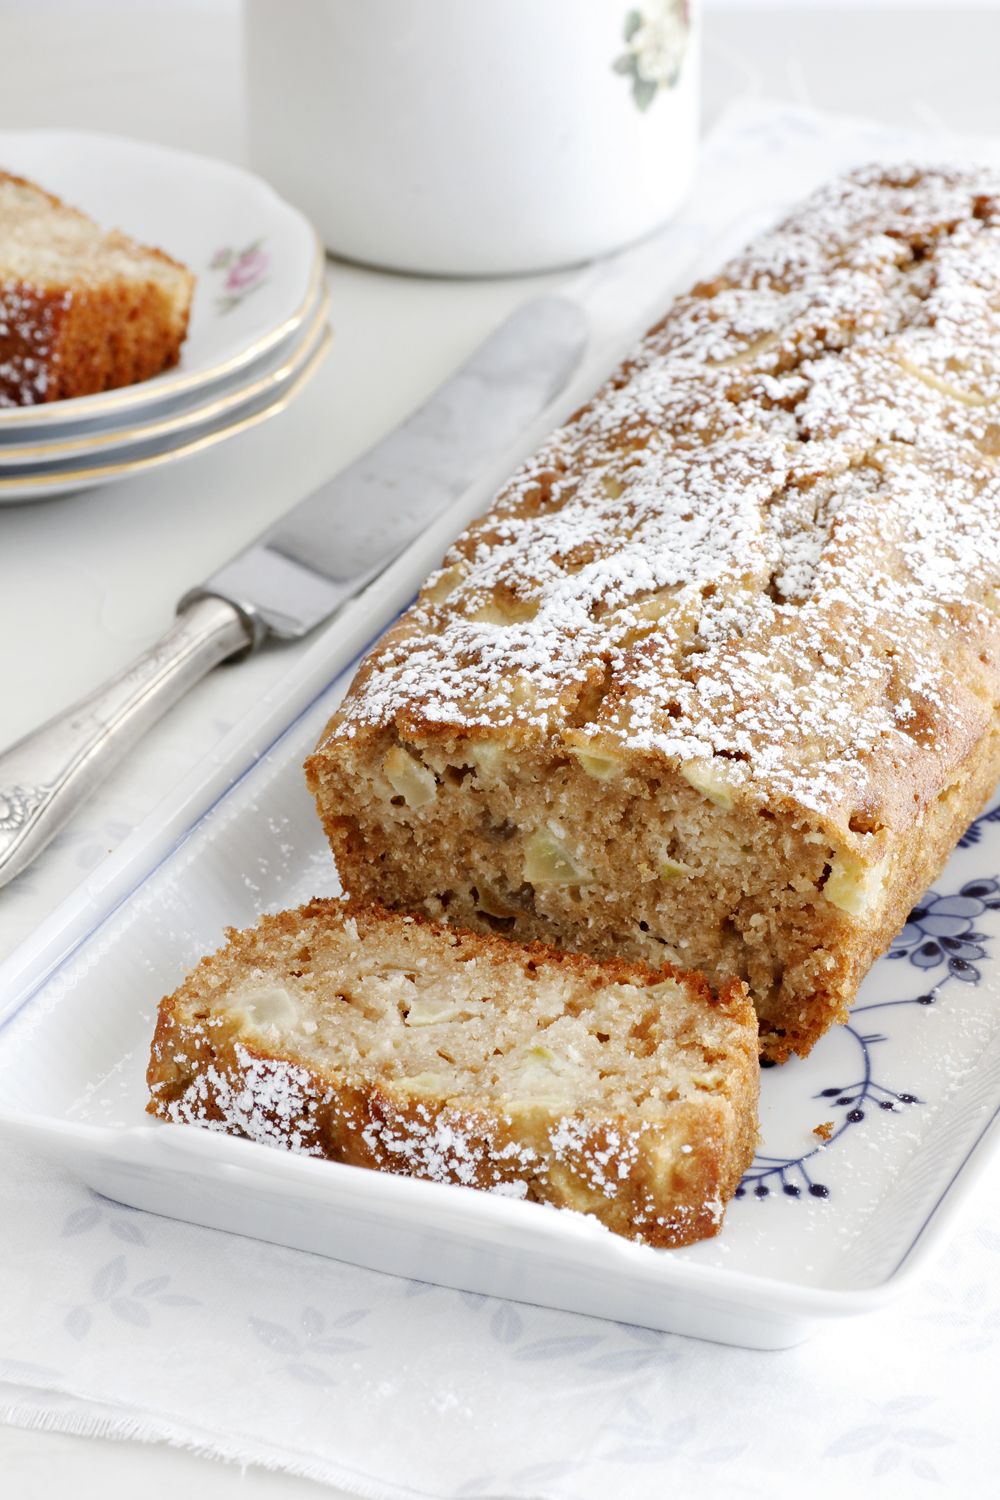 Coconut Honey Cake with Pears